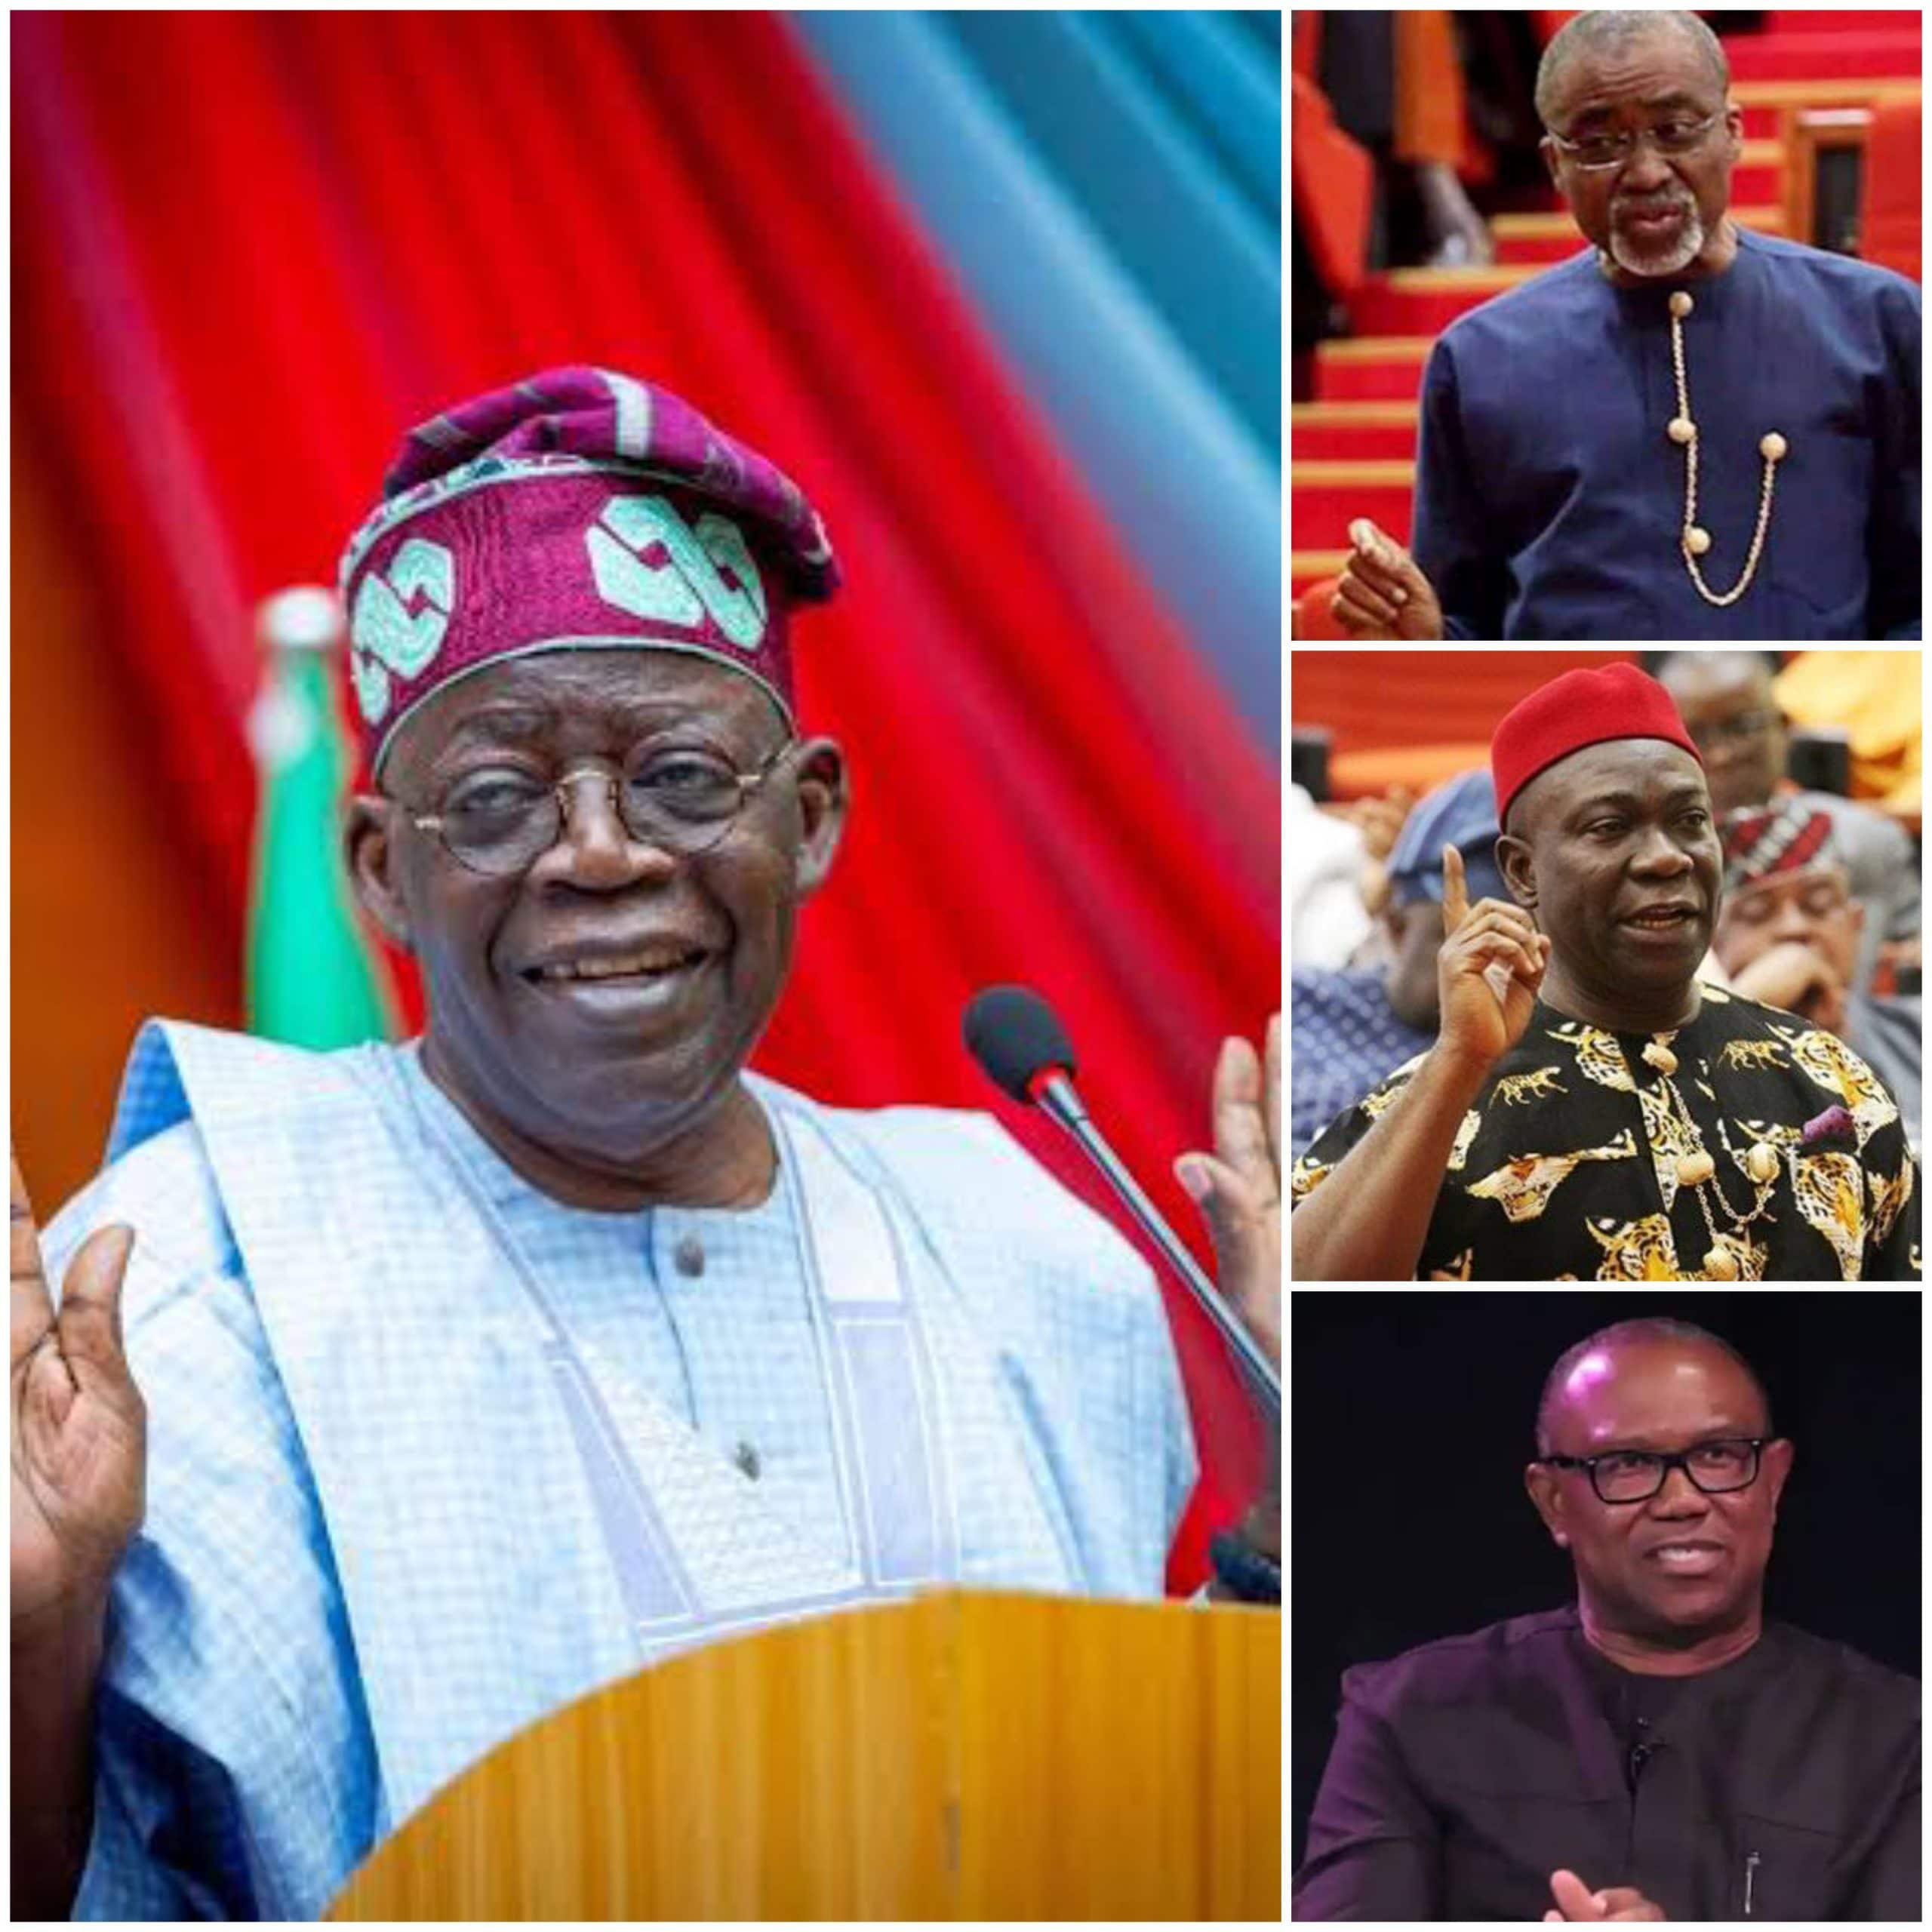 Latest Political News In Nigeria For Today, Friday, 27th May, 2022